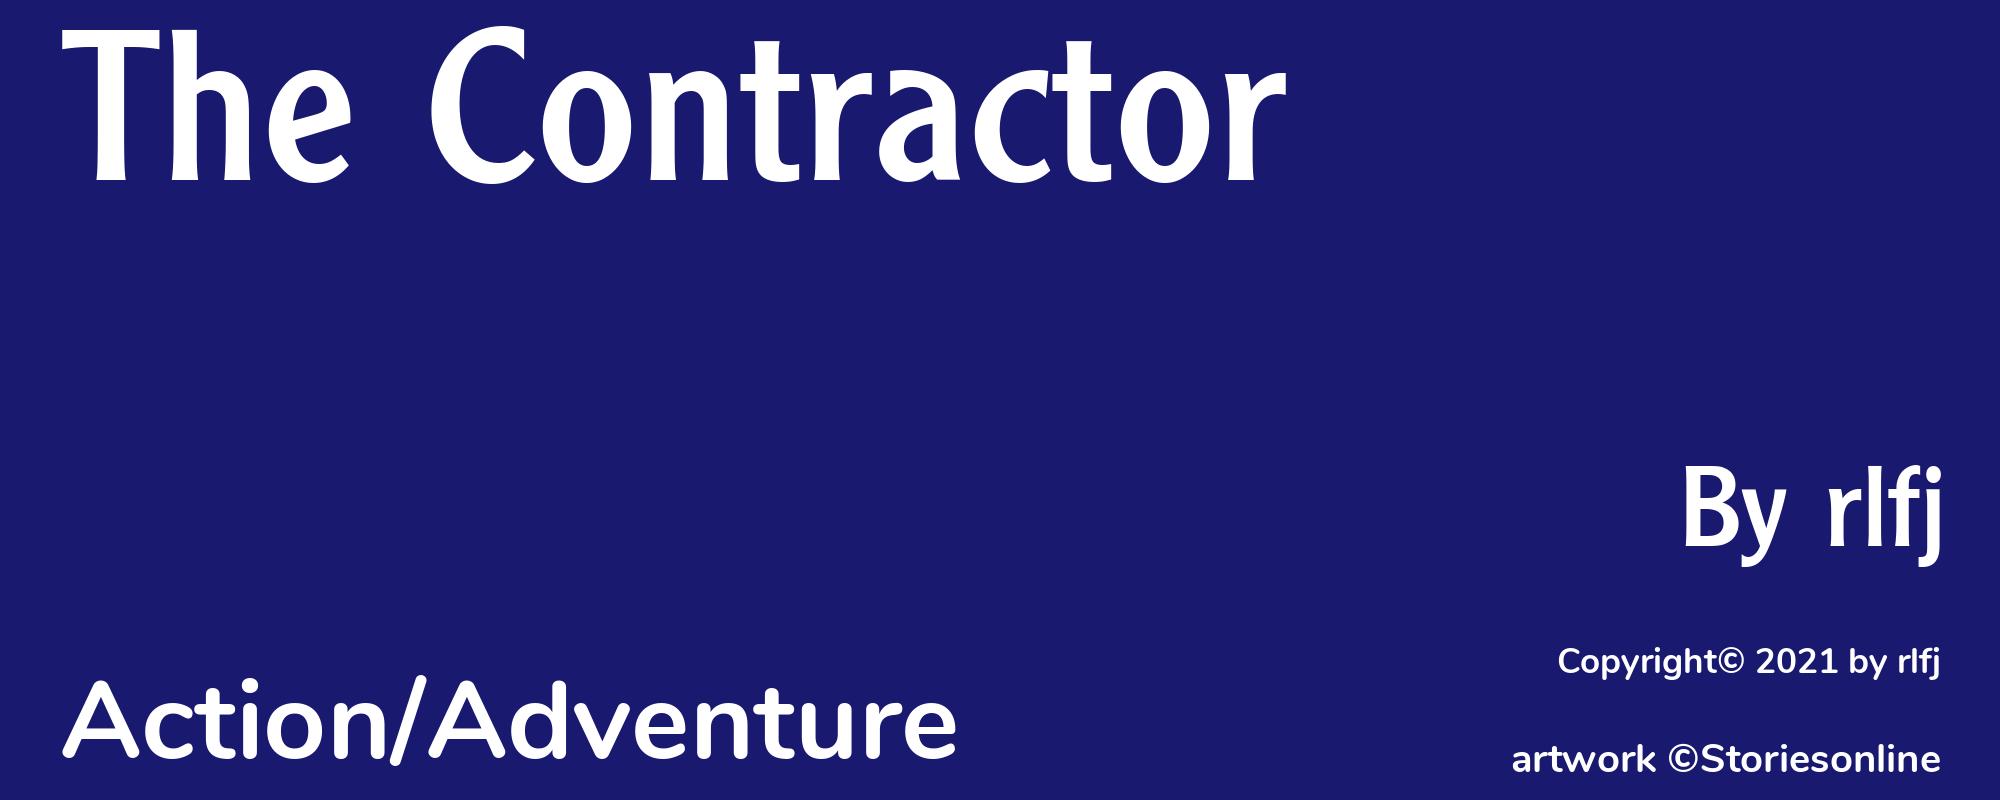 The Contractor - Cover